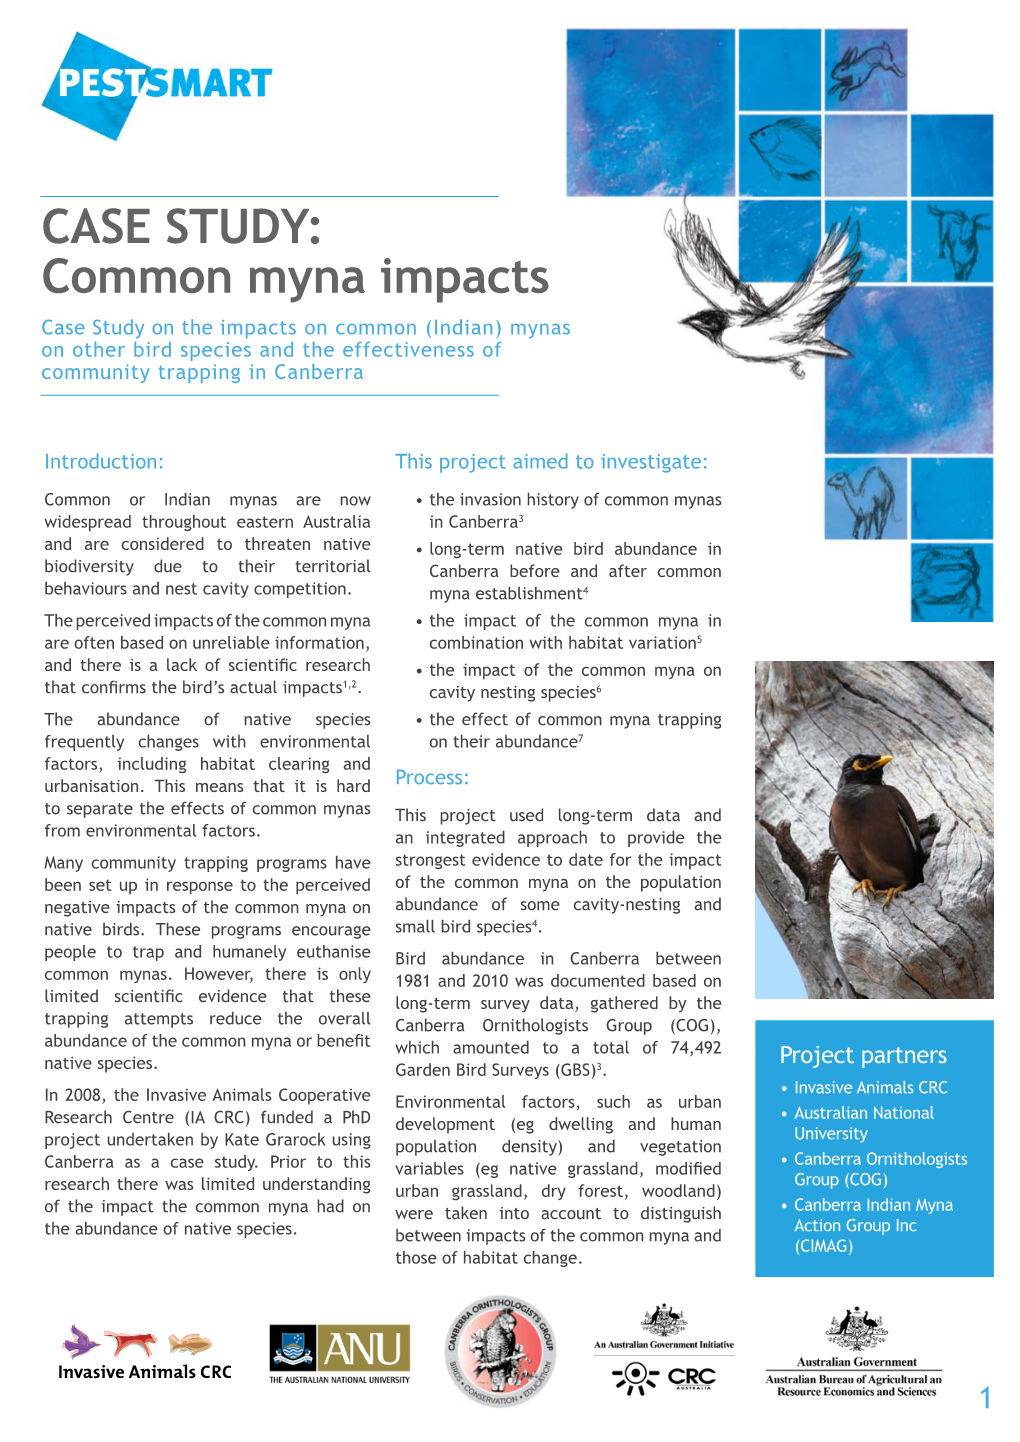 CASE STUDY: Common Myna Impacts Case Study on the Impacts on Common (Indian) Mynas on Other Bird Species and the Effectiveness of Community Trapping in Canberra